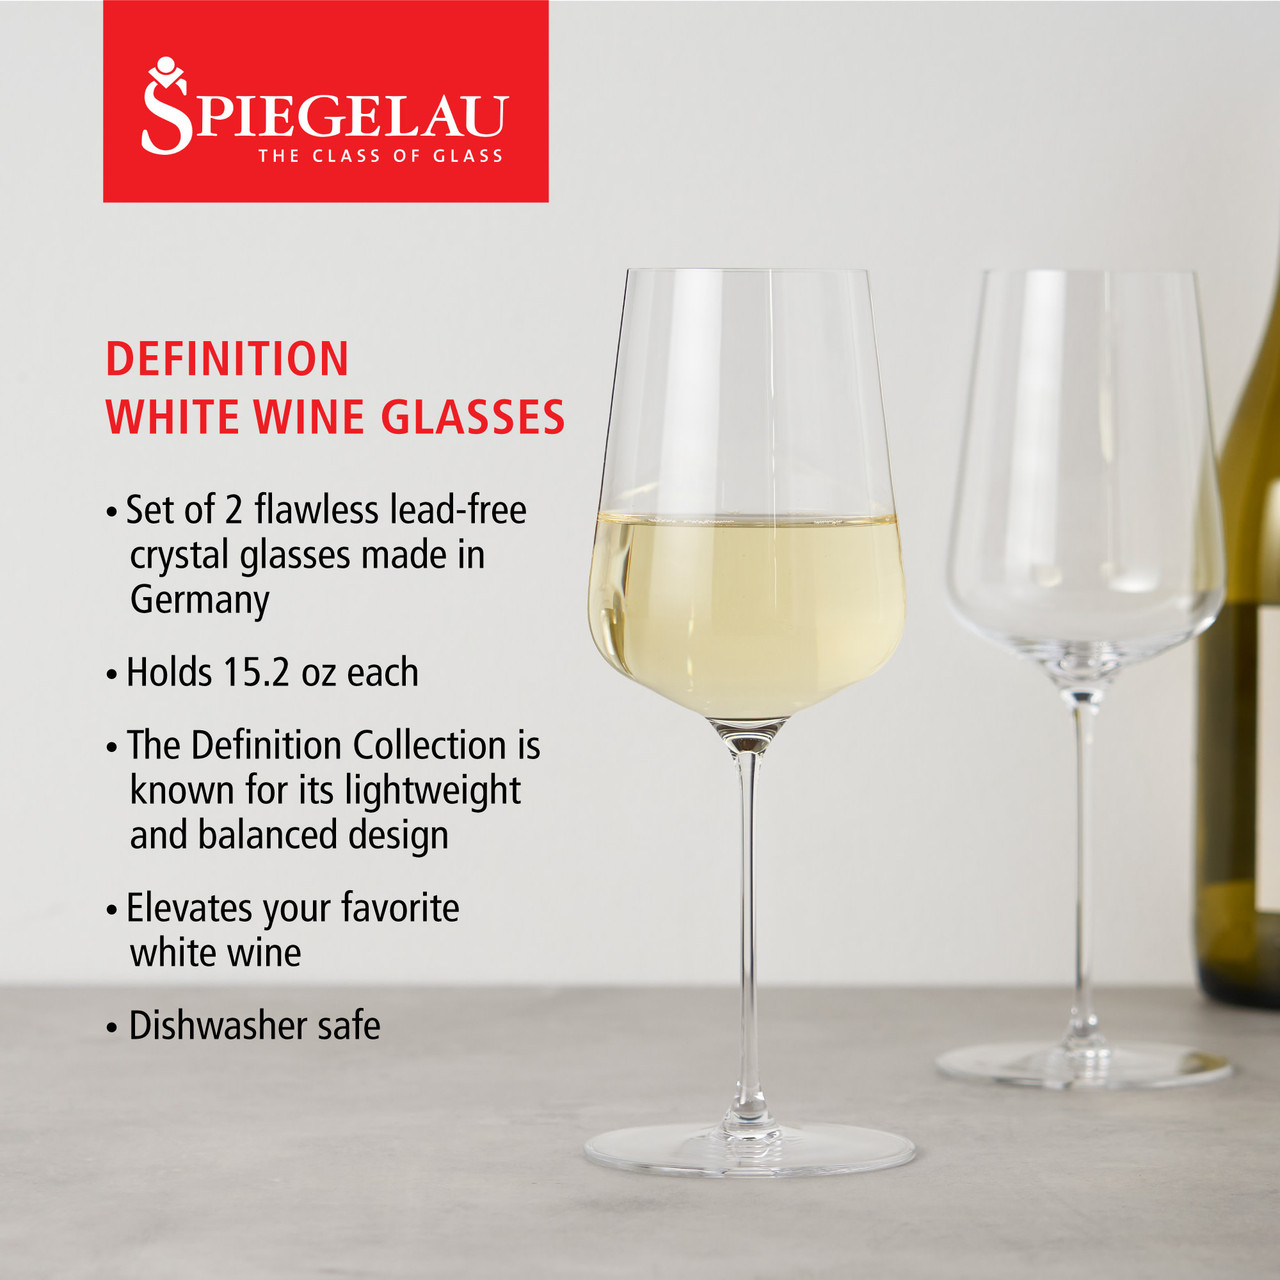 https://cdn11.bigcommerce.com/s-oo0gdojvjo/images/stencil/1280x1280/products/68861/101913/spiegelau-definition-15-2-oz-white-wine-glasses-set-of-2-3__77953.1683797315.jpg?c=2&imbypass=on